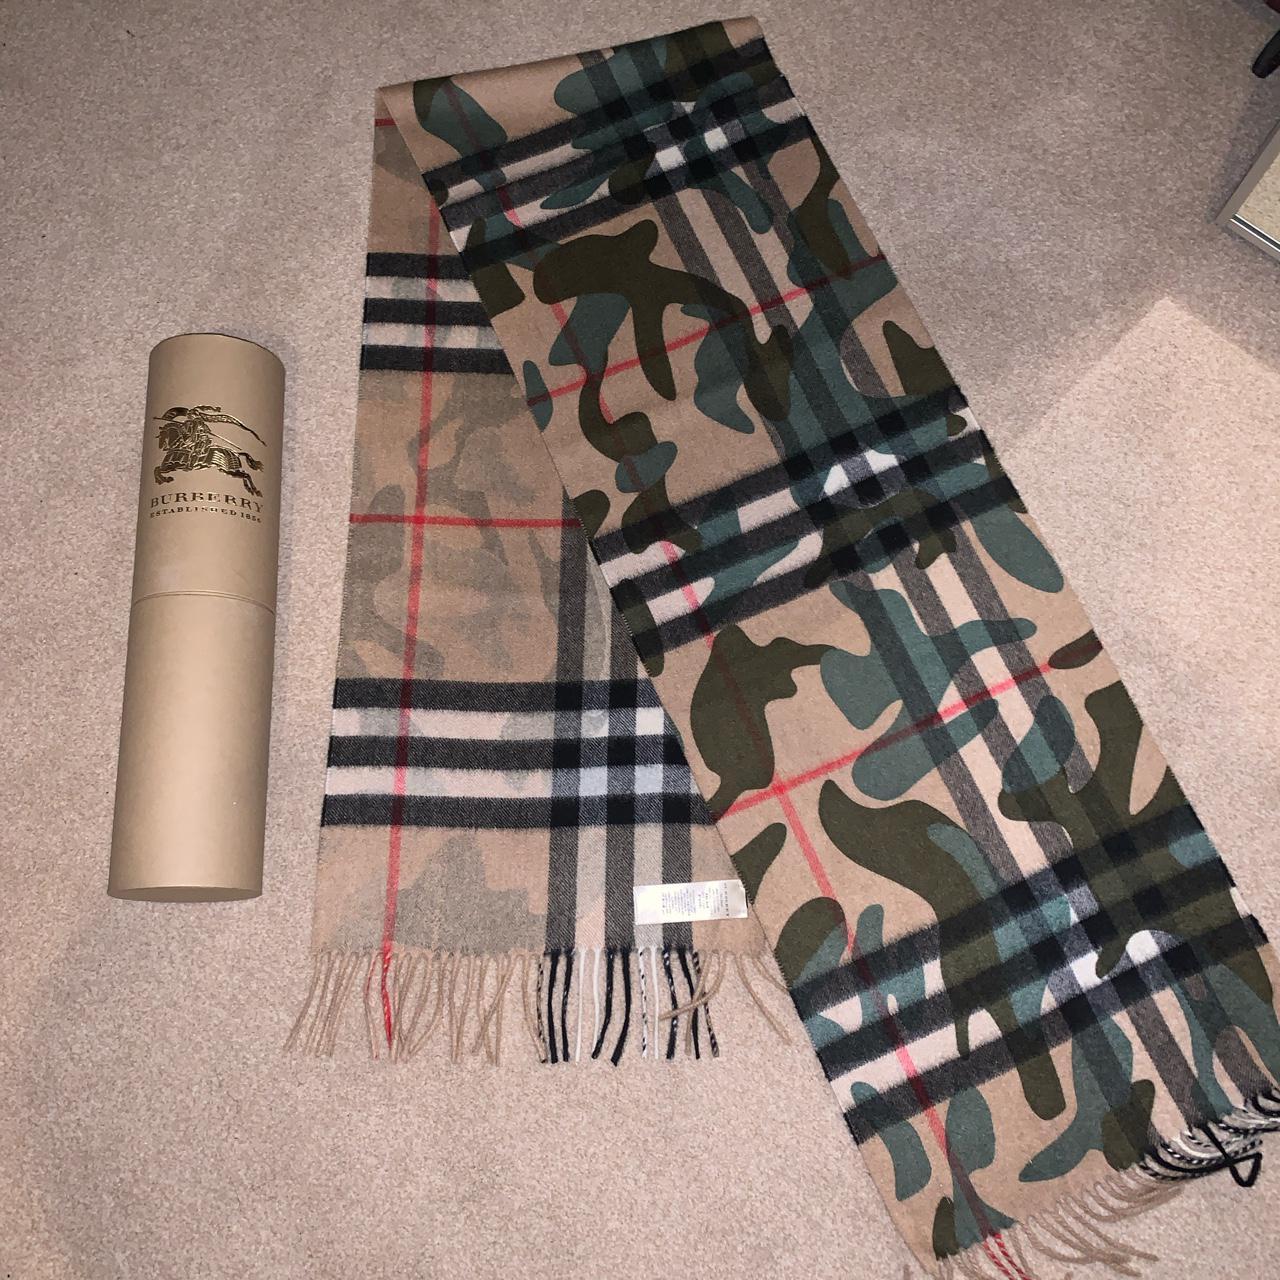 AUTHENTIC NEW BURBERRY 100% CASHMERE SCARF